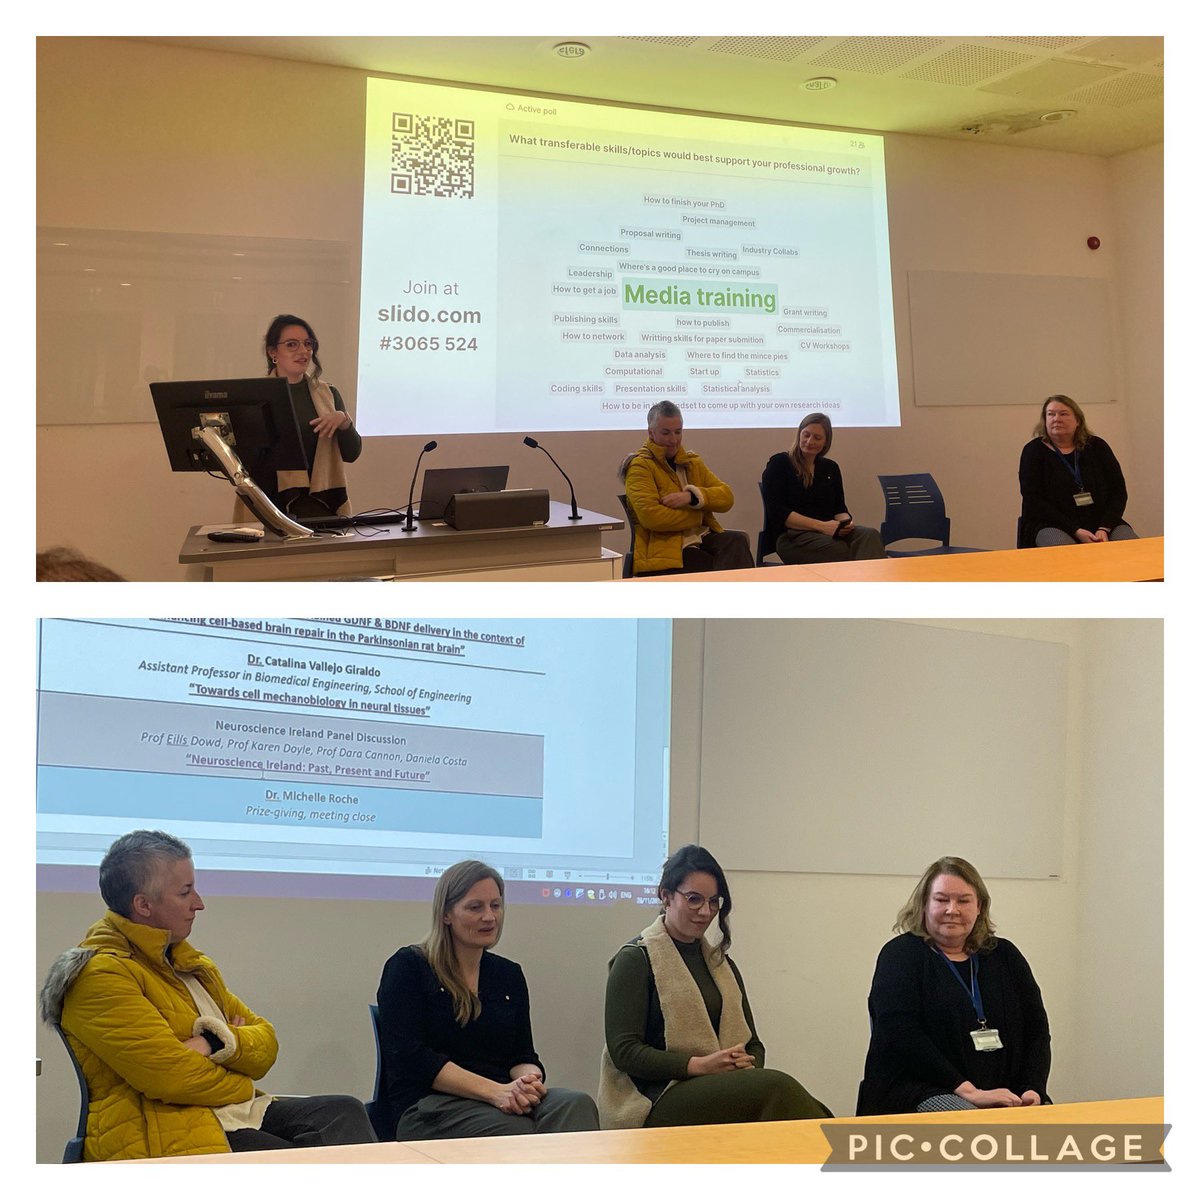 Panel discussion at @GalwayNeuro research day on the future of Neuroscience Research in Ireland with panel members past, current and future presidents of @NeuroscienceIRL and president of @YoungNeuroIrl Prof Karen Doyle, Prof Eilis Dowd, Prof Dara Cannon and Daniela Costa